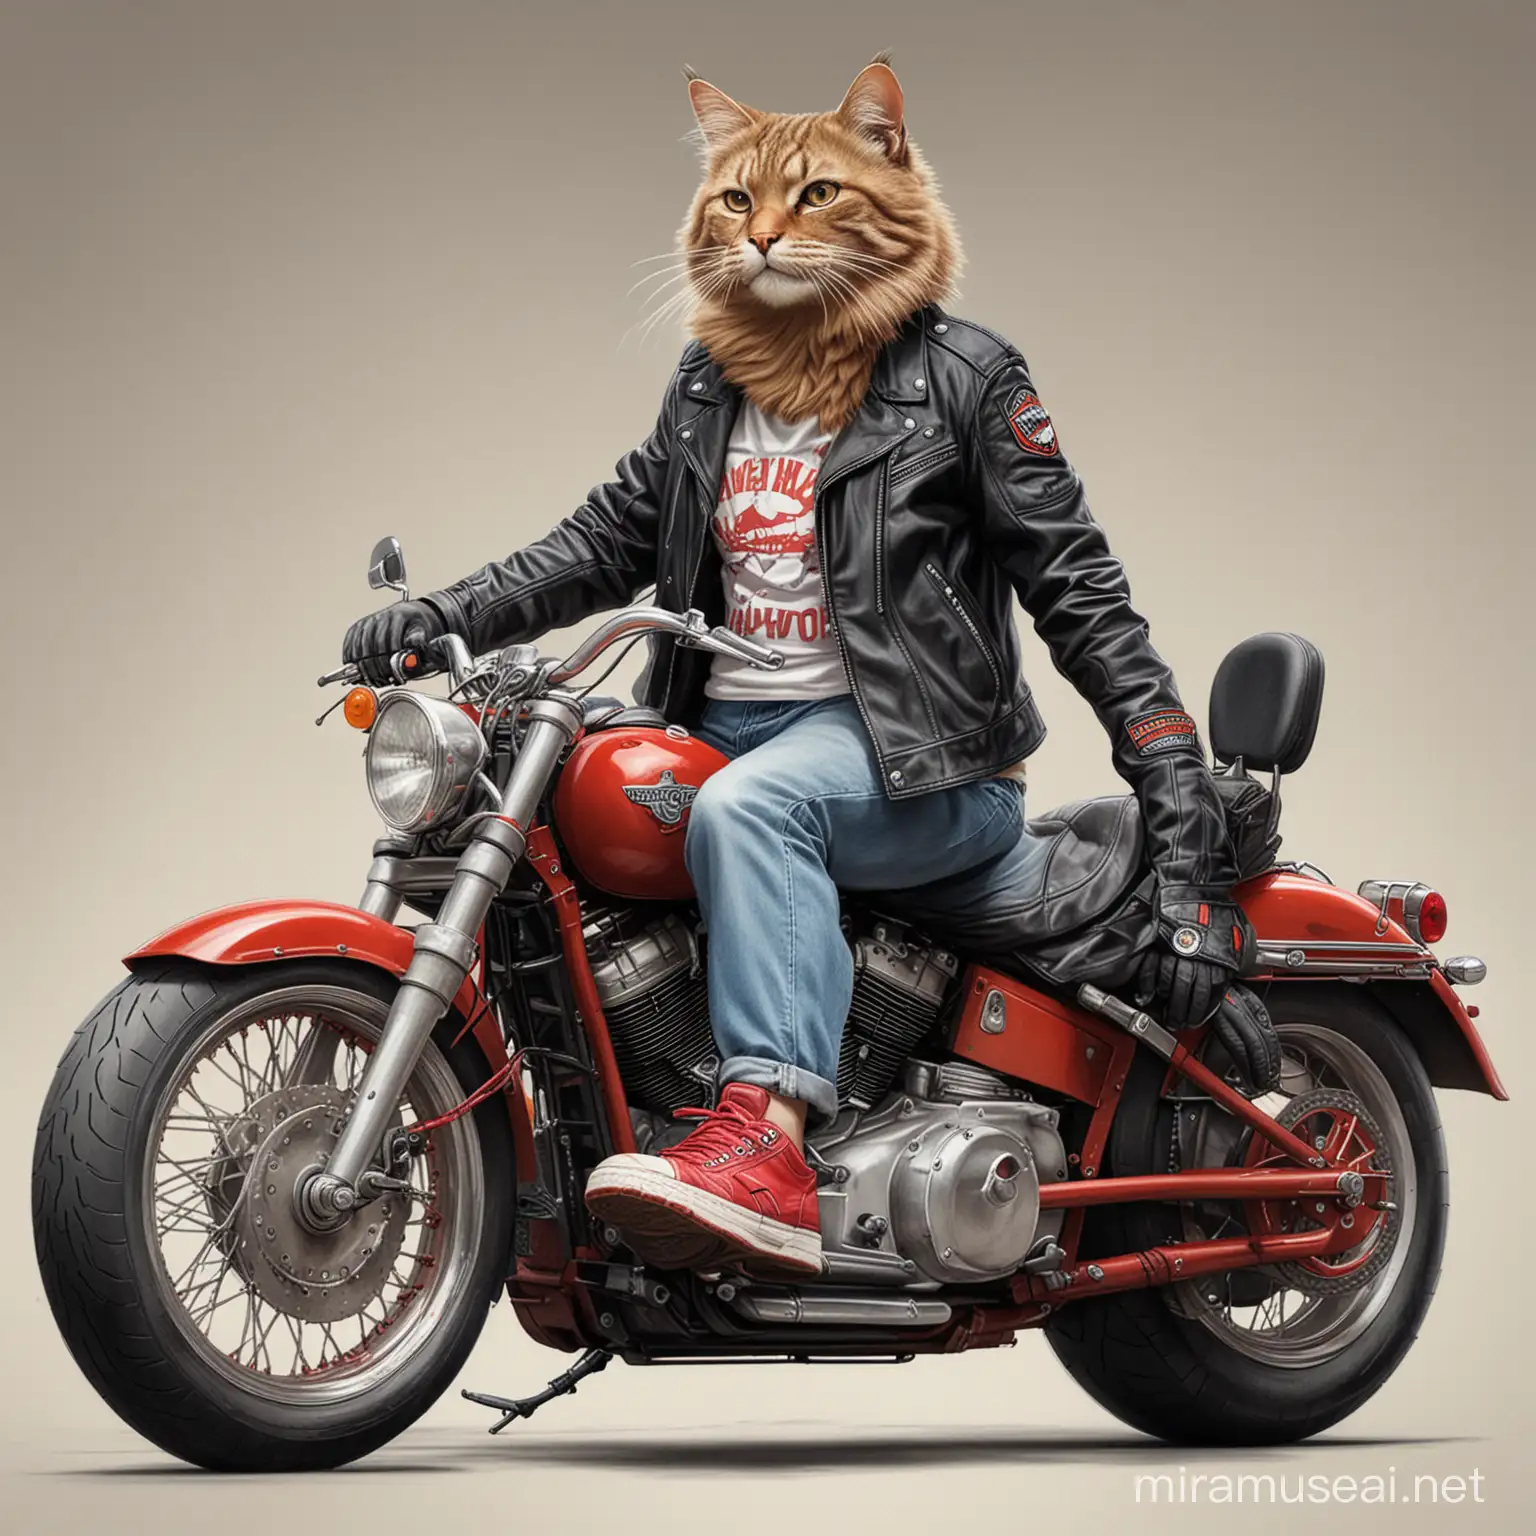 Large Cat Riding Harley Davidson Motorcycle in Stylish Outfit